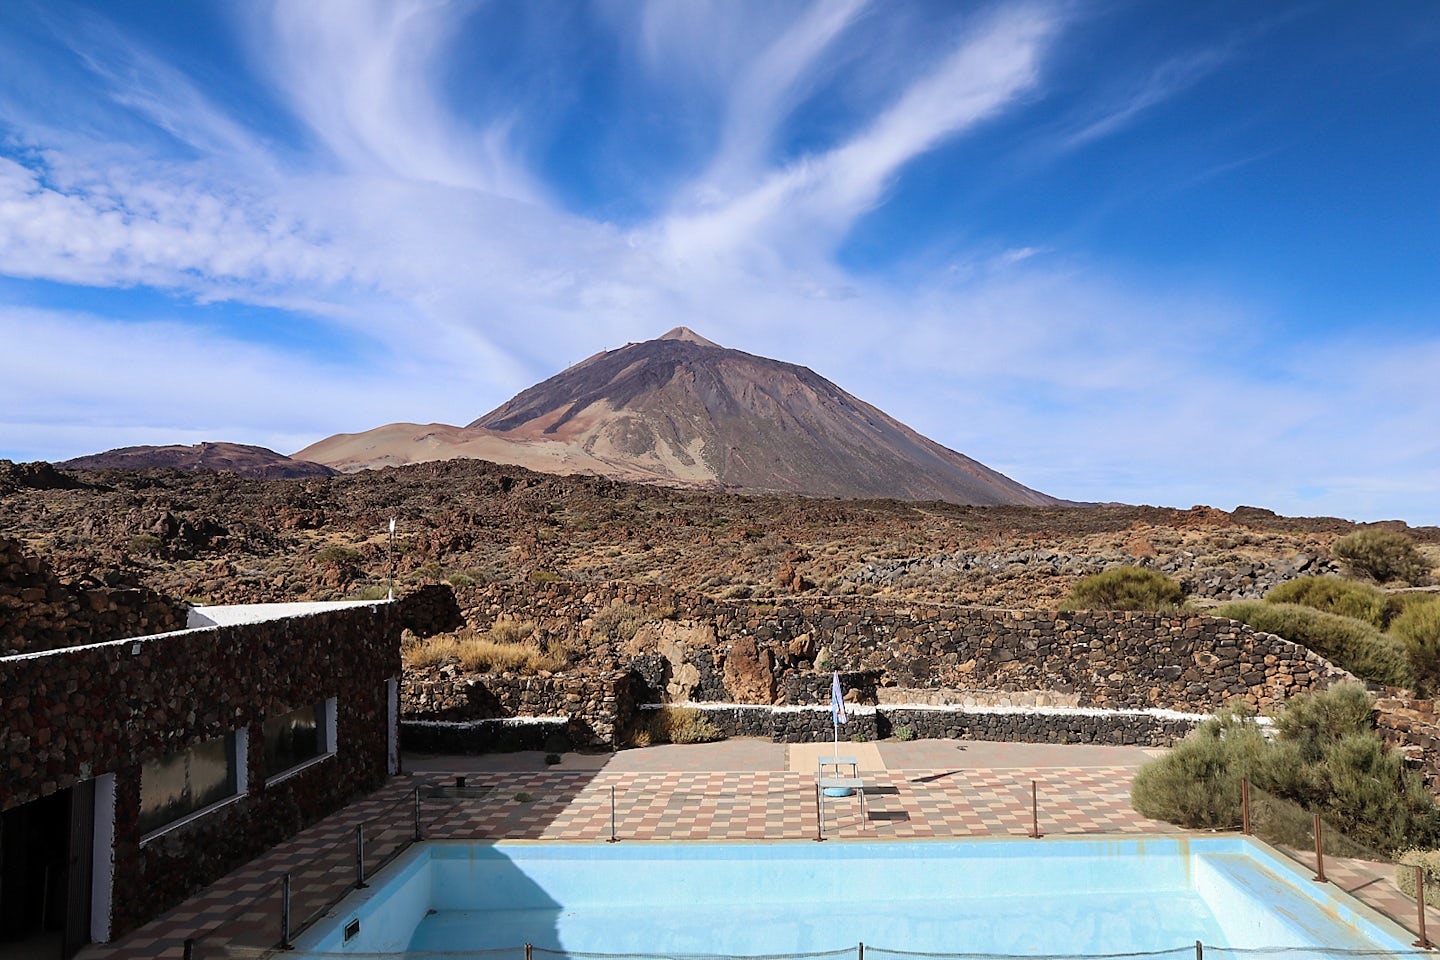 Coach excursion to the Mt Tiede National Park in Tenerife.